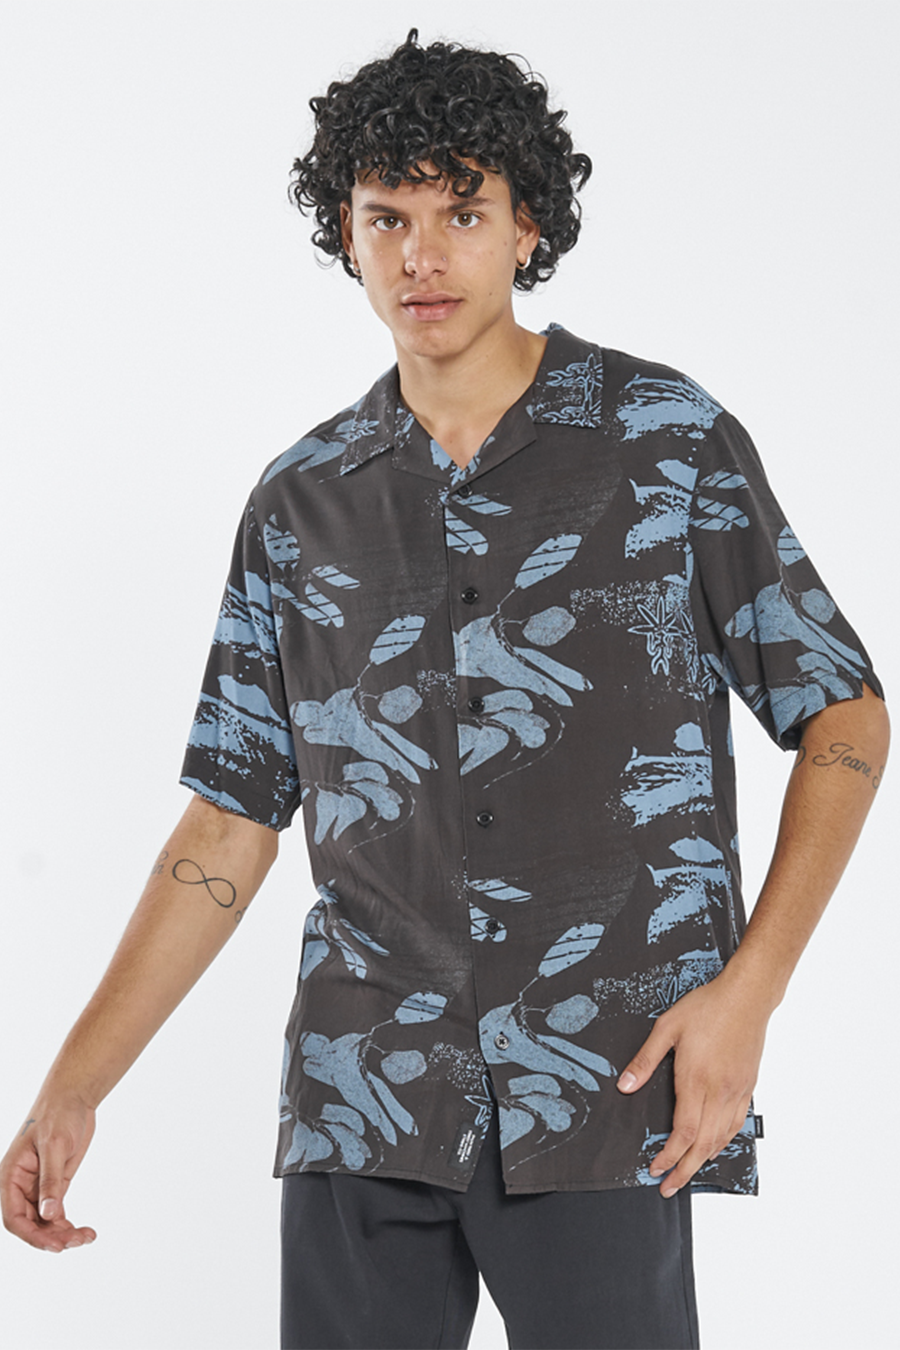 Collective Experience Bowling Shirt | Black - Main Image Number 1 of 2